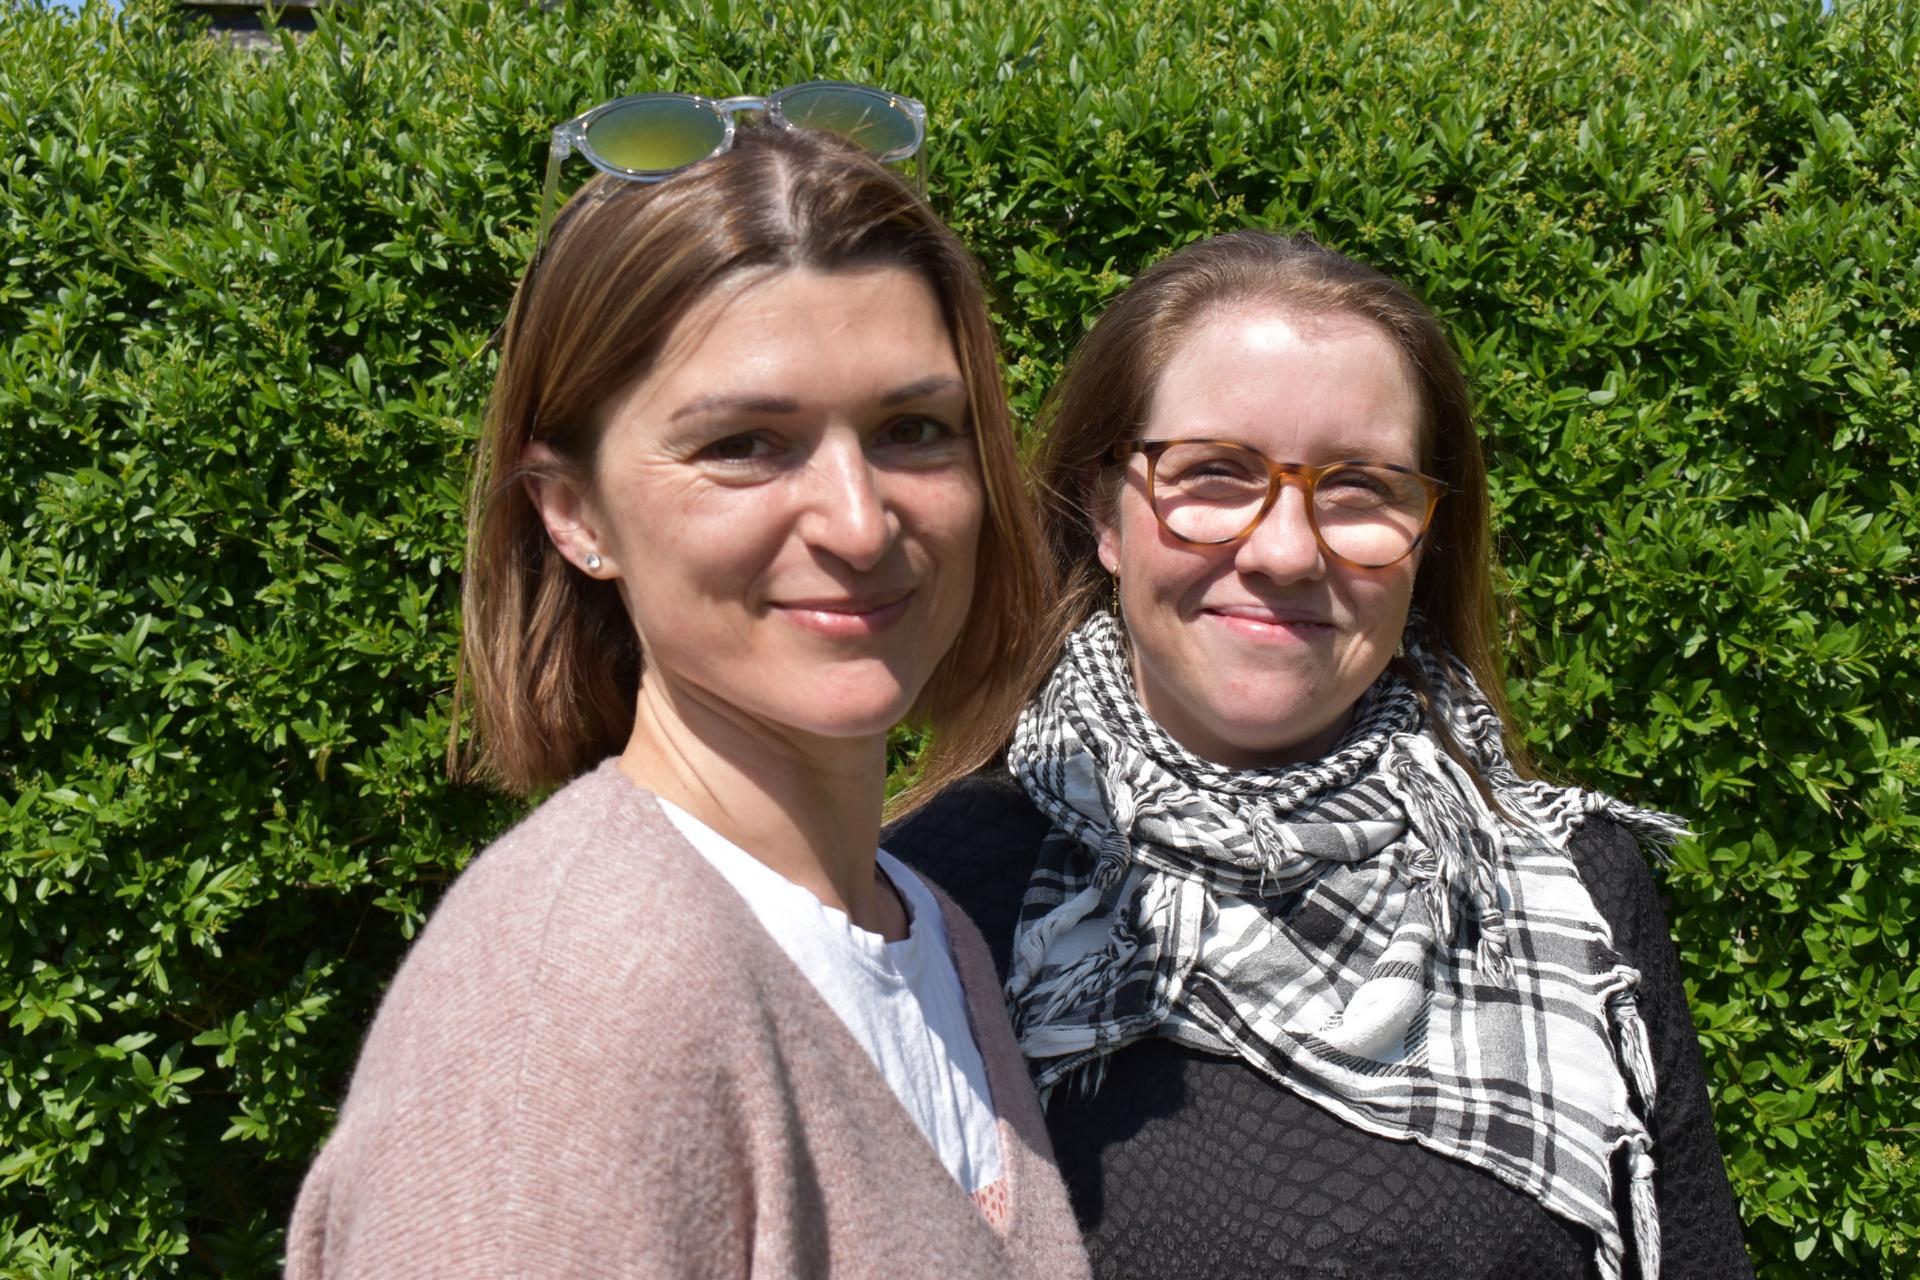 Olesia Olinyk, from Ukraine, and her friend Mona Elgaard, from Denmark, met at a gathering organized by the Danish Red Cross.